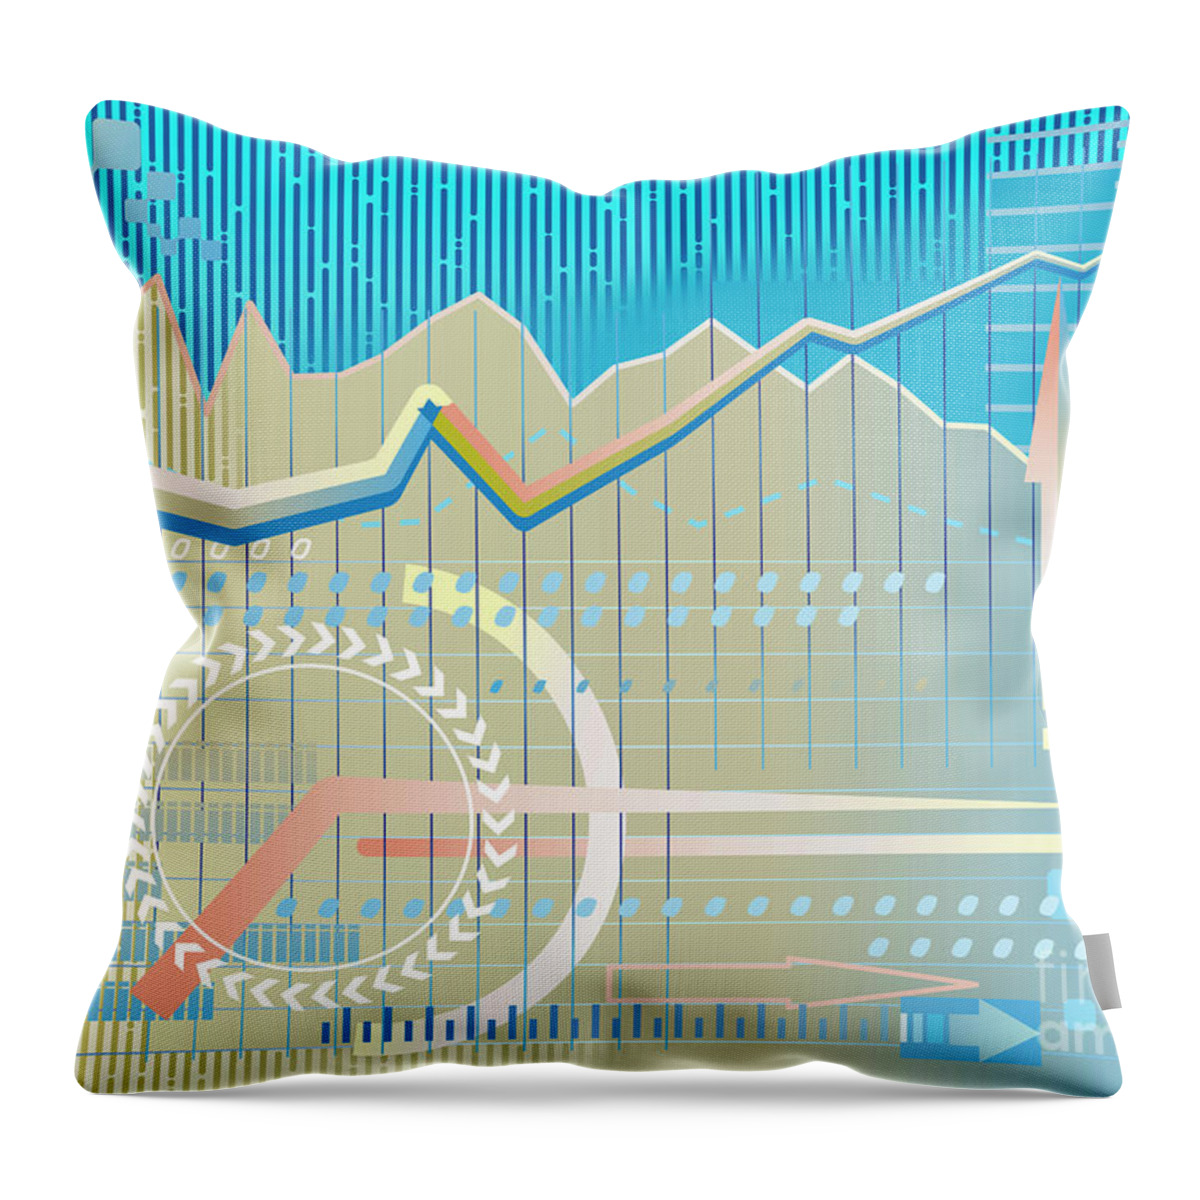 Success Throw Pillow featuring the digital art Everything Grows Up by Ariadna De Raadt